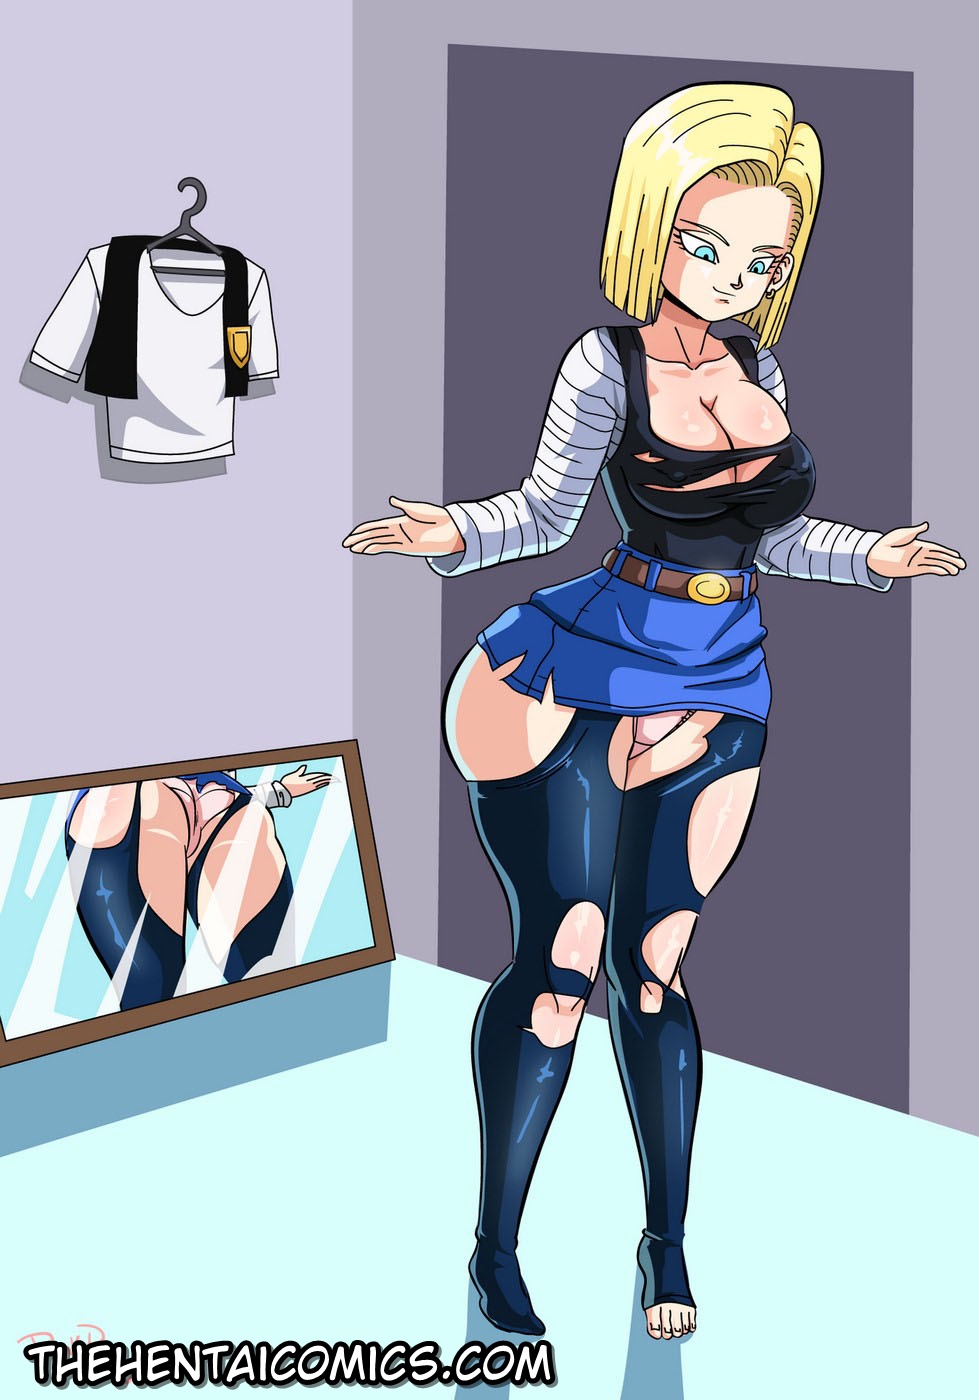 Android 18 meets Krillin